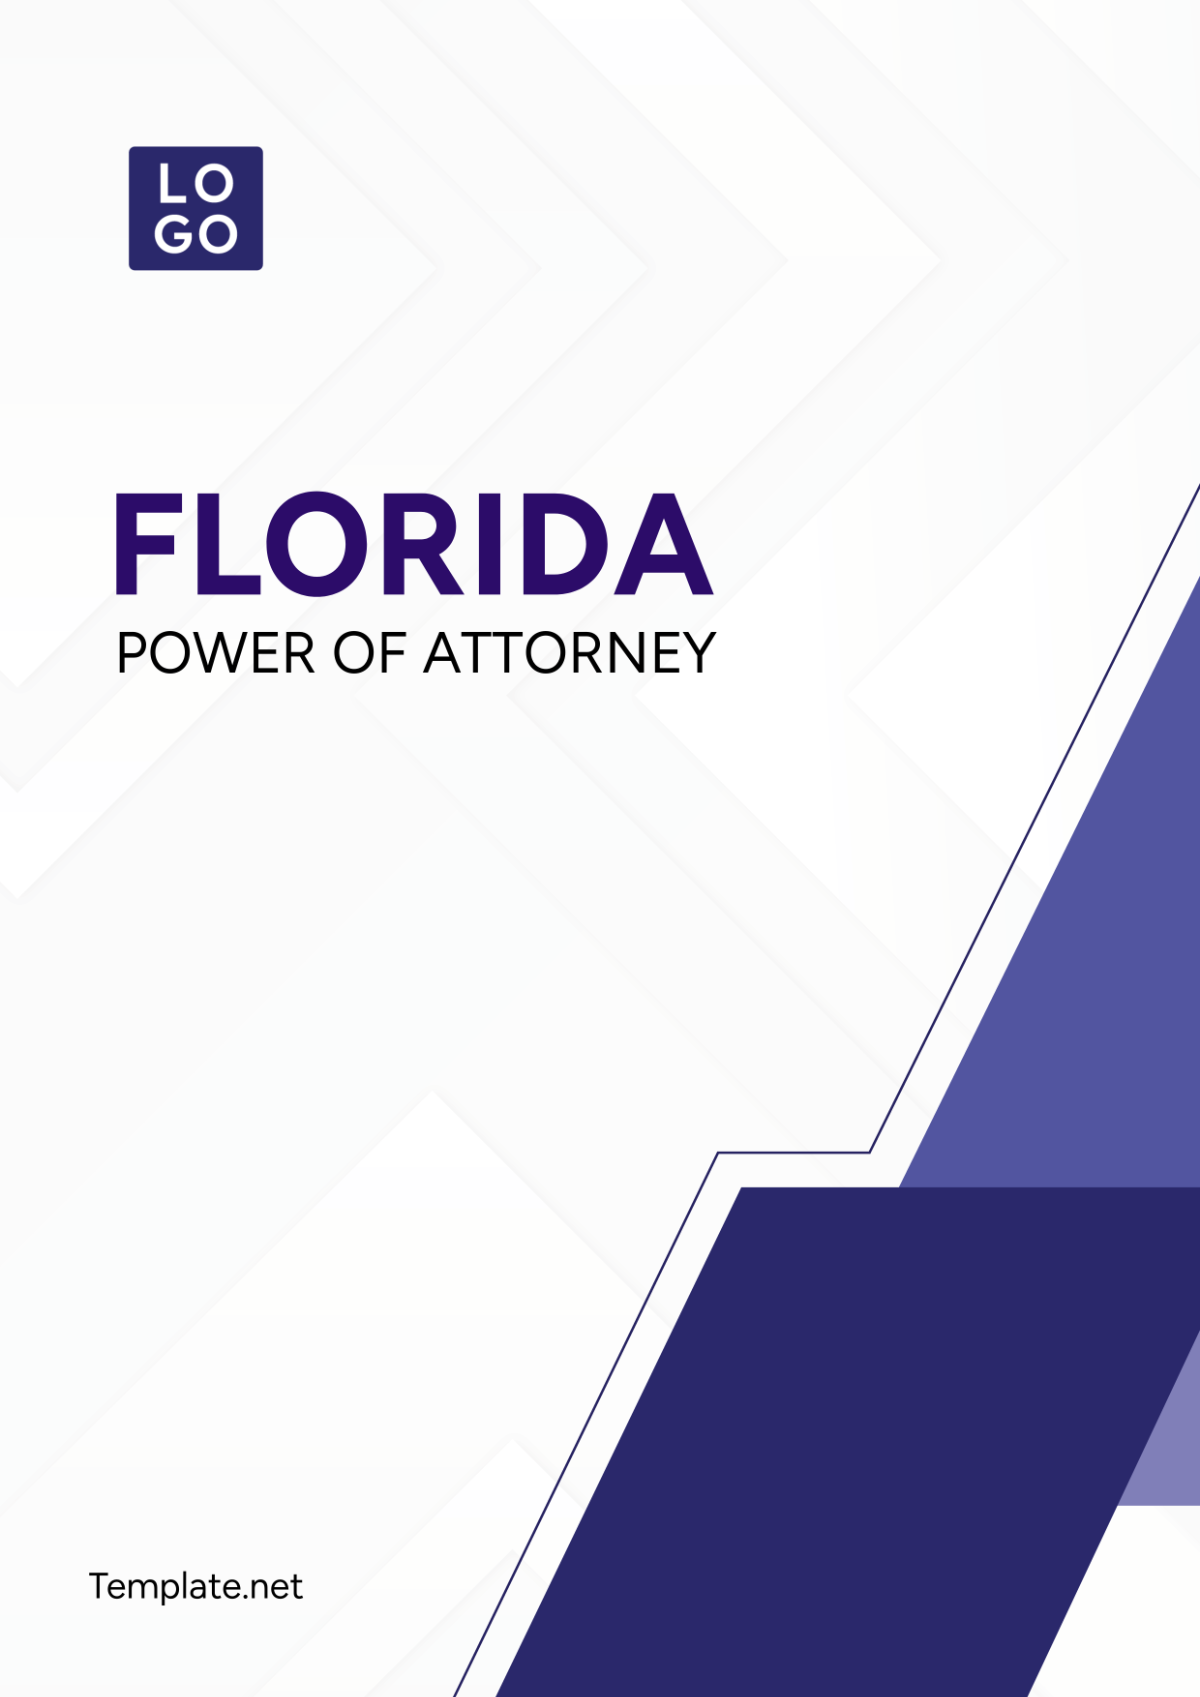 Florida Power of Attorney Cover Page Template